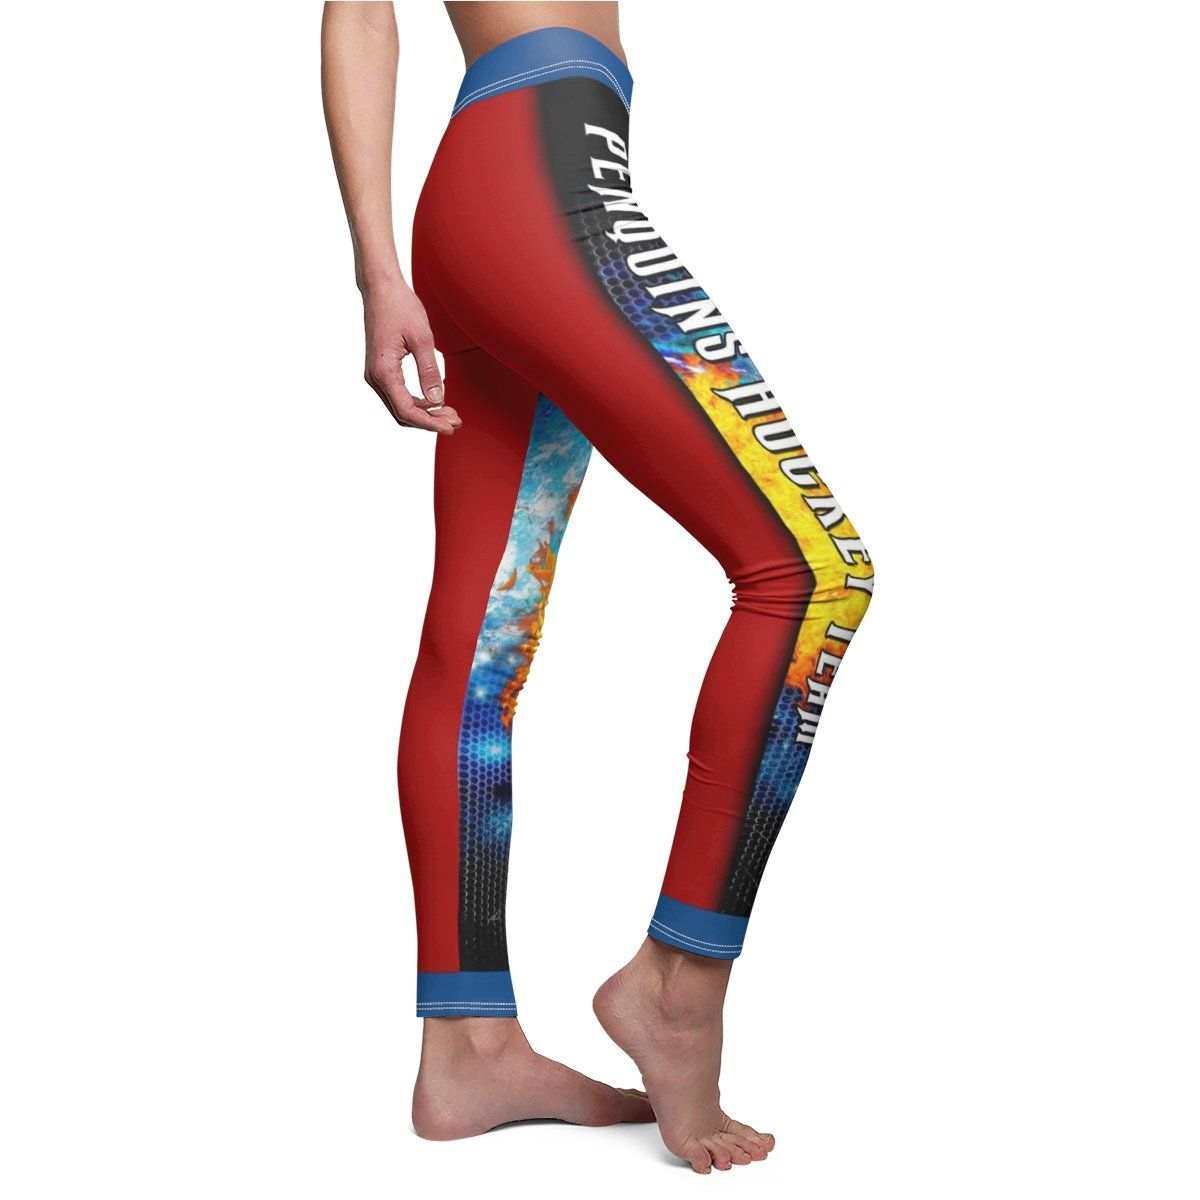 Ice - V.3 - Extreme Sportswear Cut & Sew Leggings Template-Photoshop Template - Photo Solutions